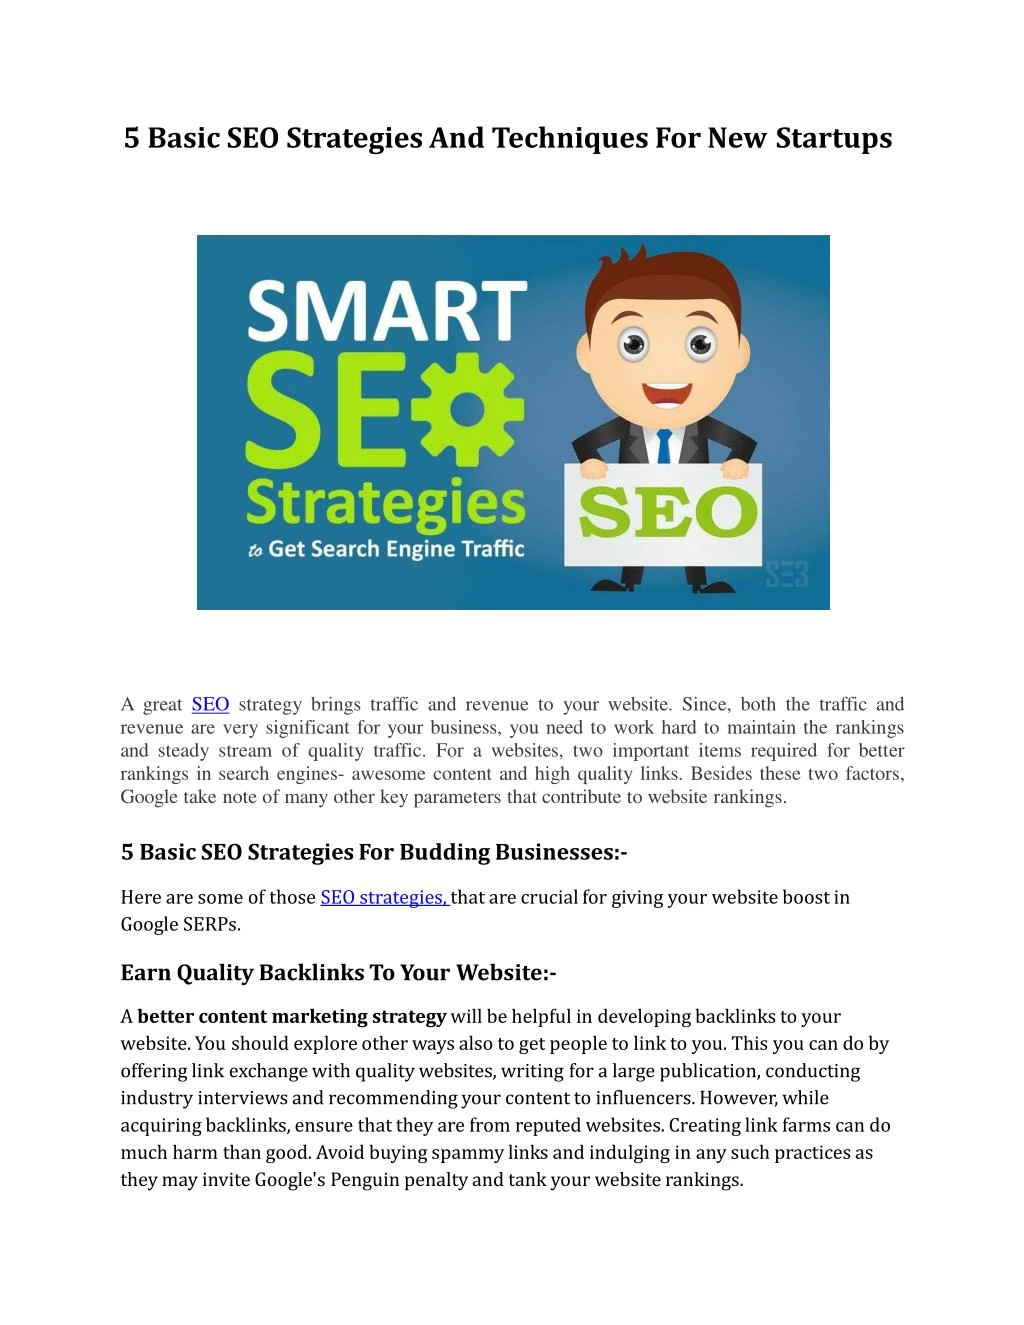 5 basic seo strategies and techniques